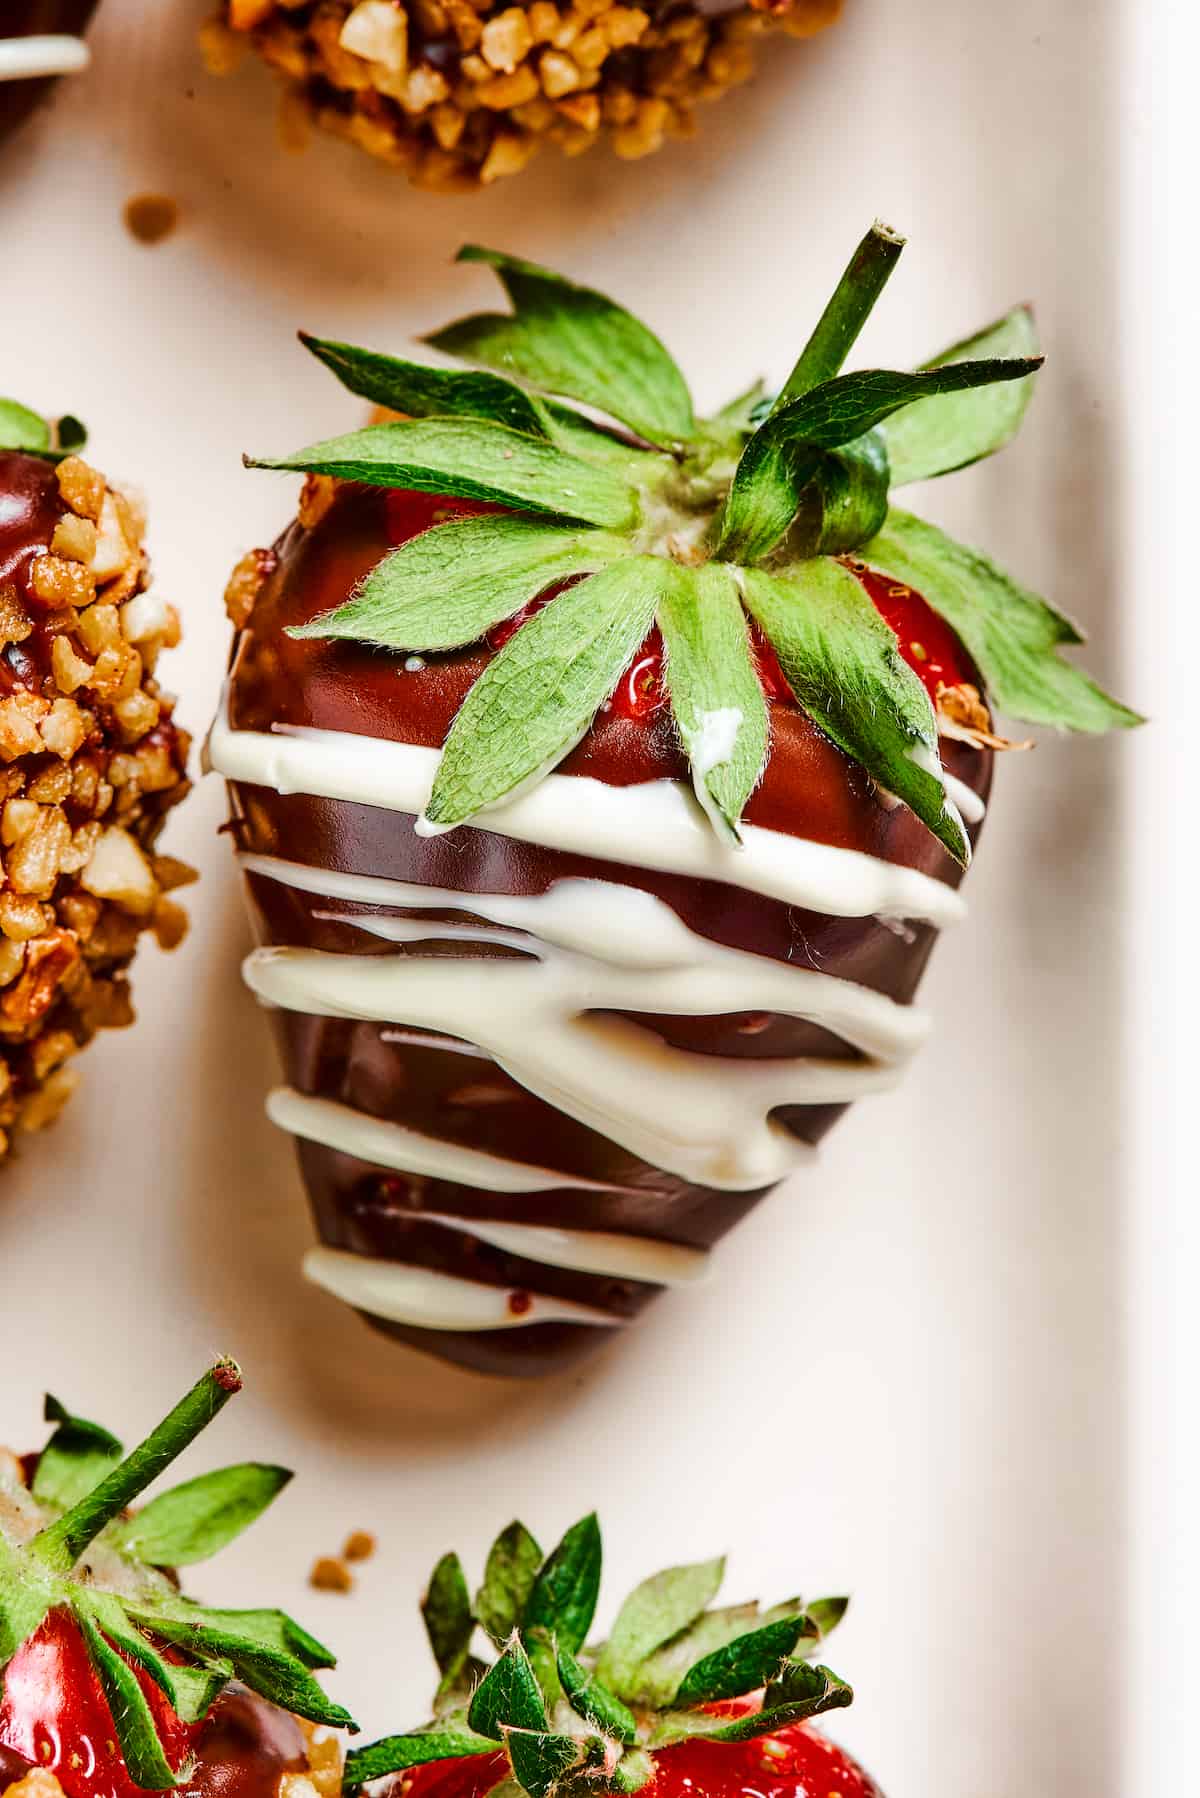 A strawberry dipped in chocolate and drizzled with white chocolate.